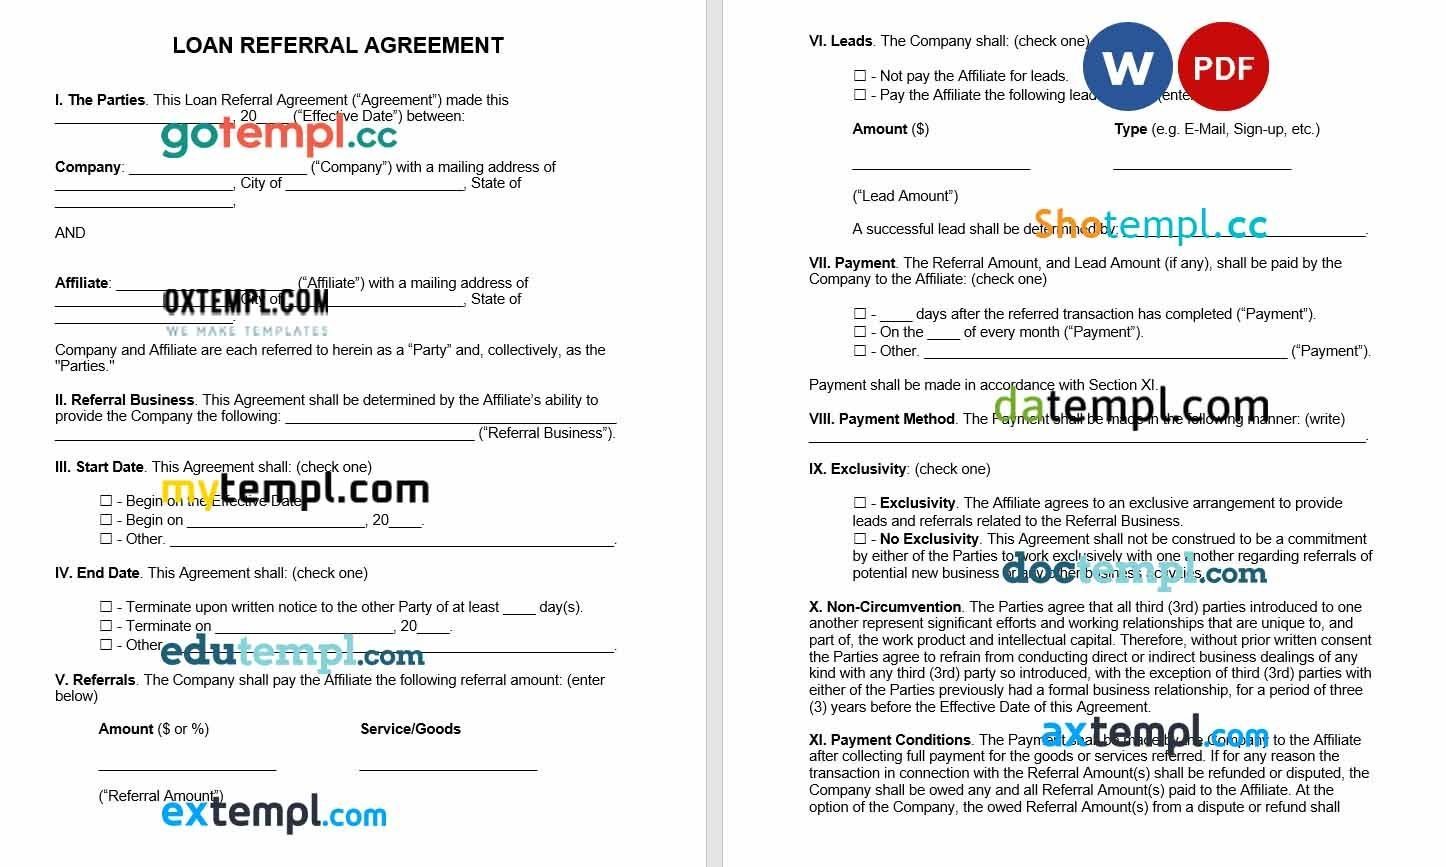 Loan Referral Agreement Word example, fully editable